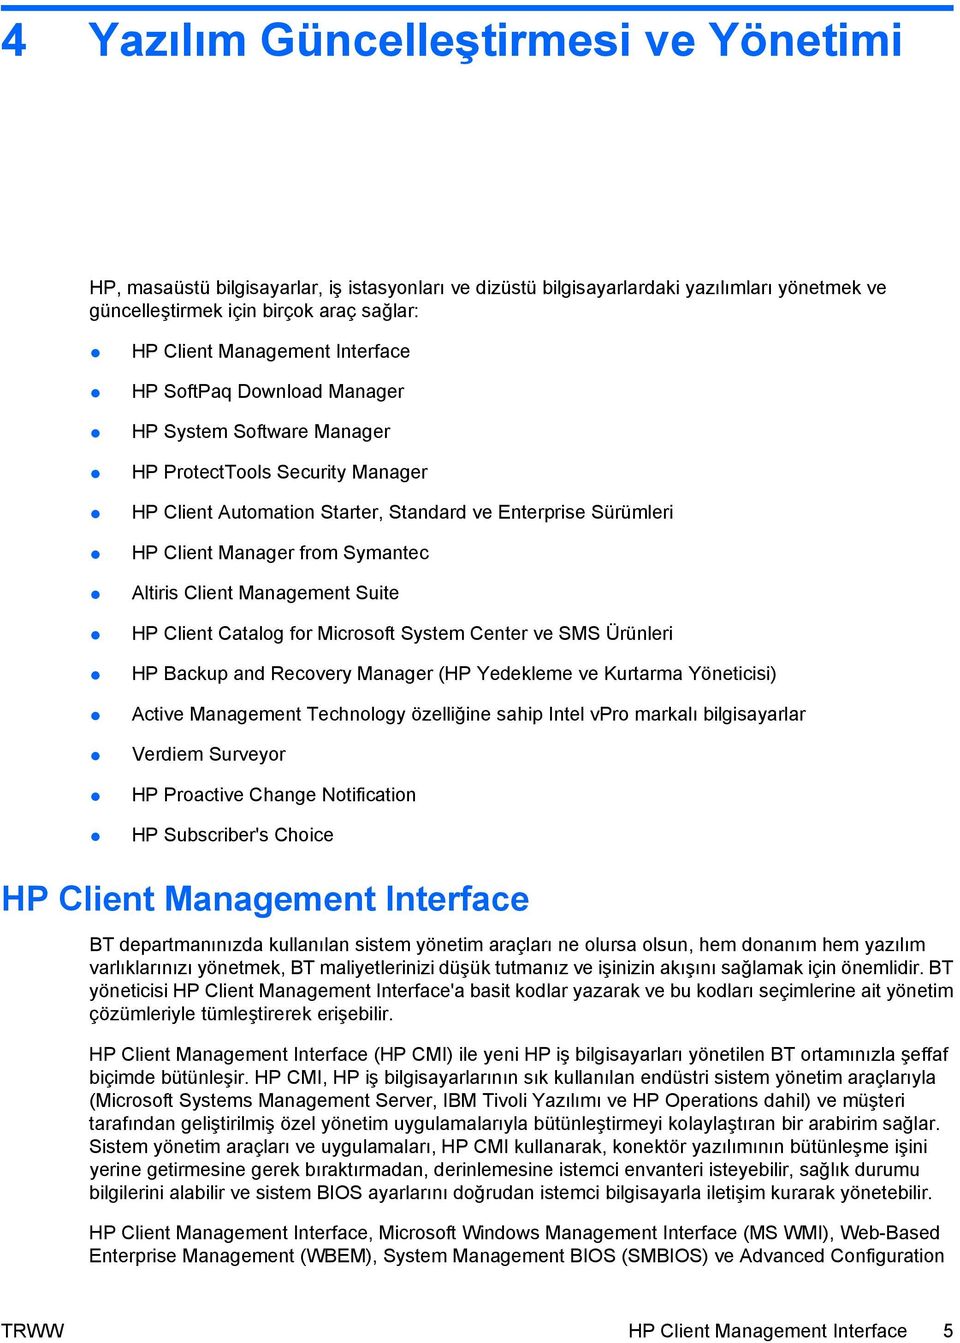 Altiris Client Management Suite HP Client Catalog for Microsoft System Center ve SMS Ürünleri HP Backup and Recovery Manager (HP Yedekleme ve Kurtarma Yöneticisi) Active Management Technology